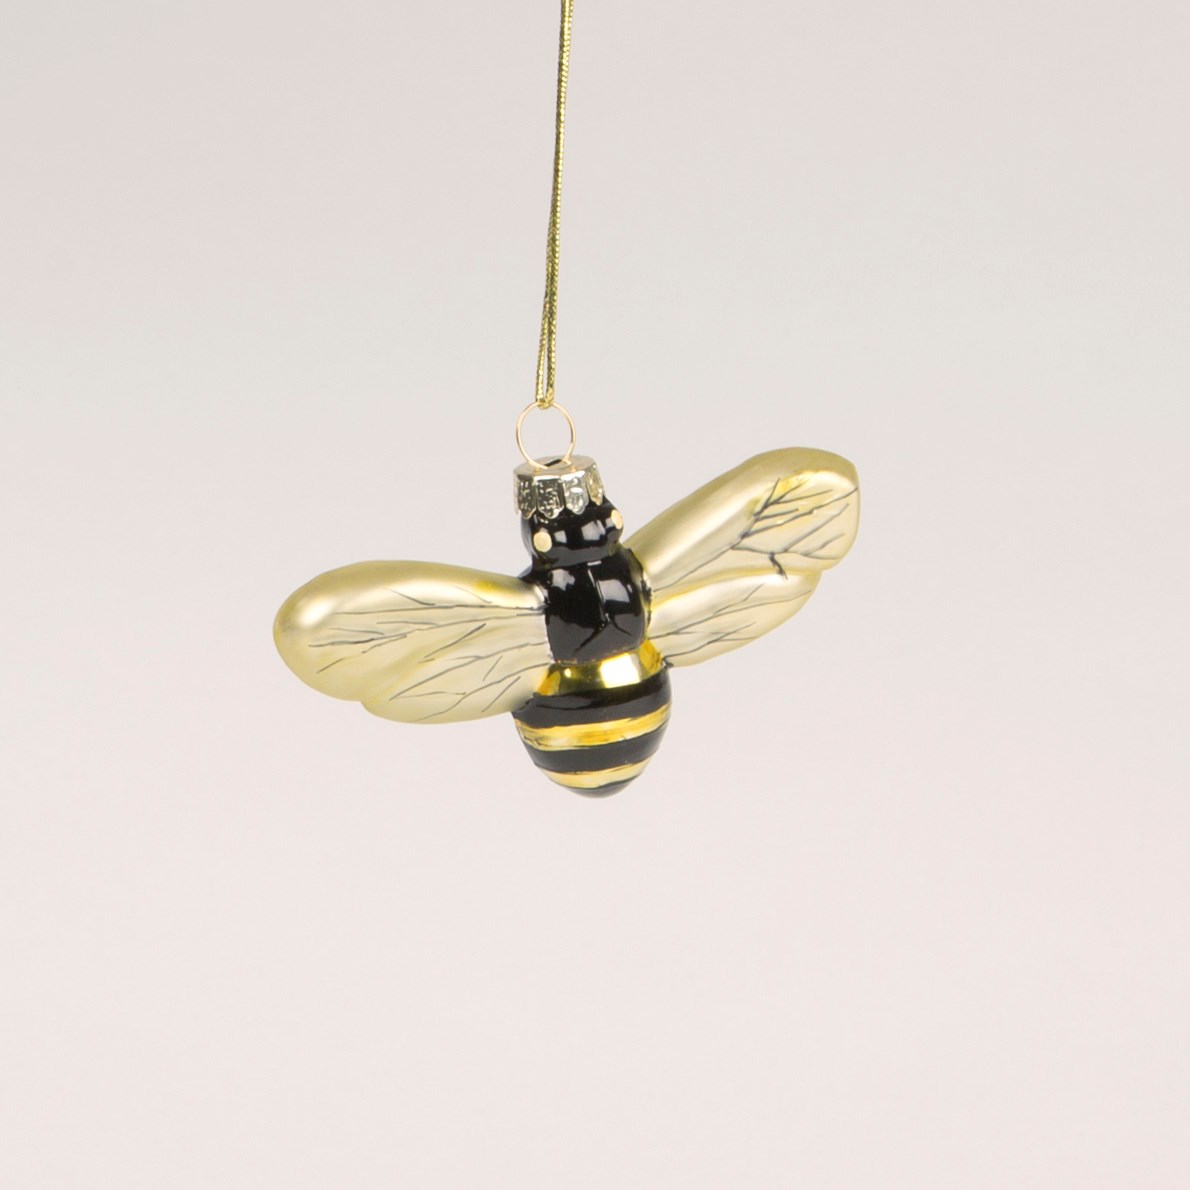 &Quirky Golden Bee Christmas Bauble